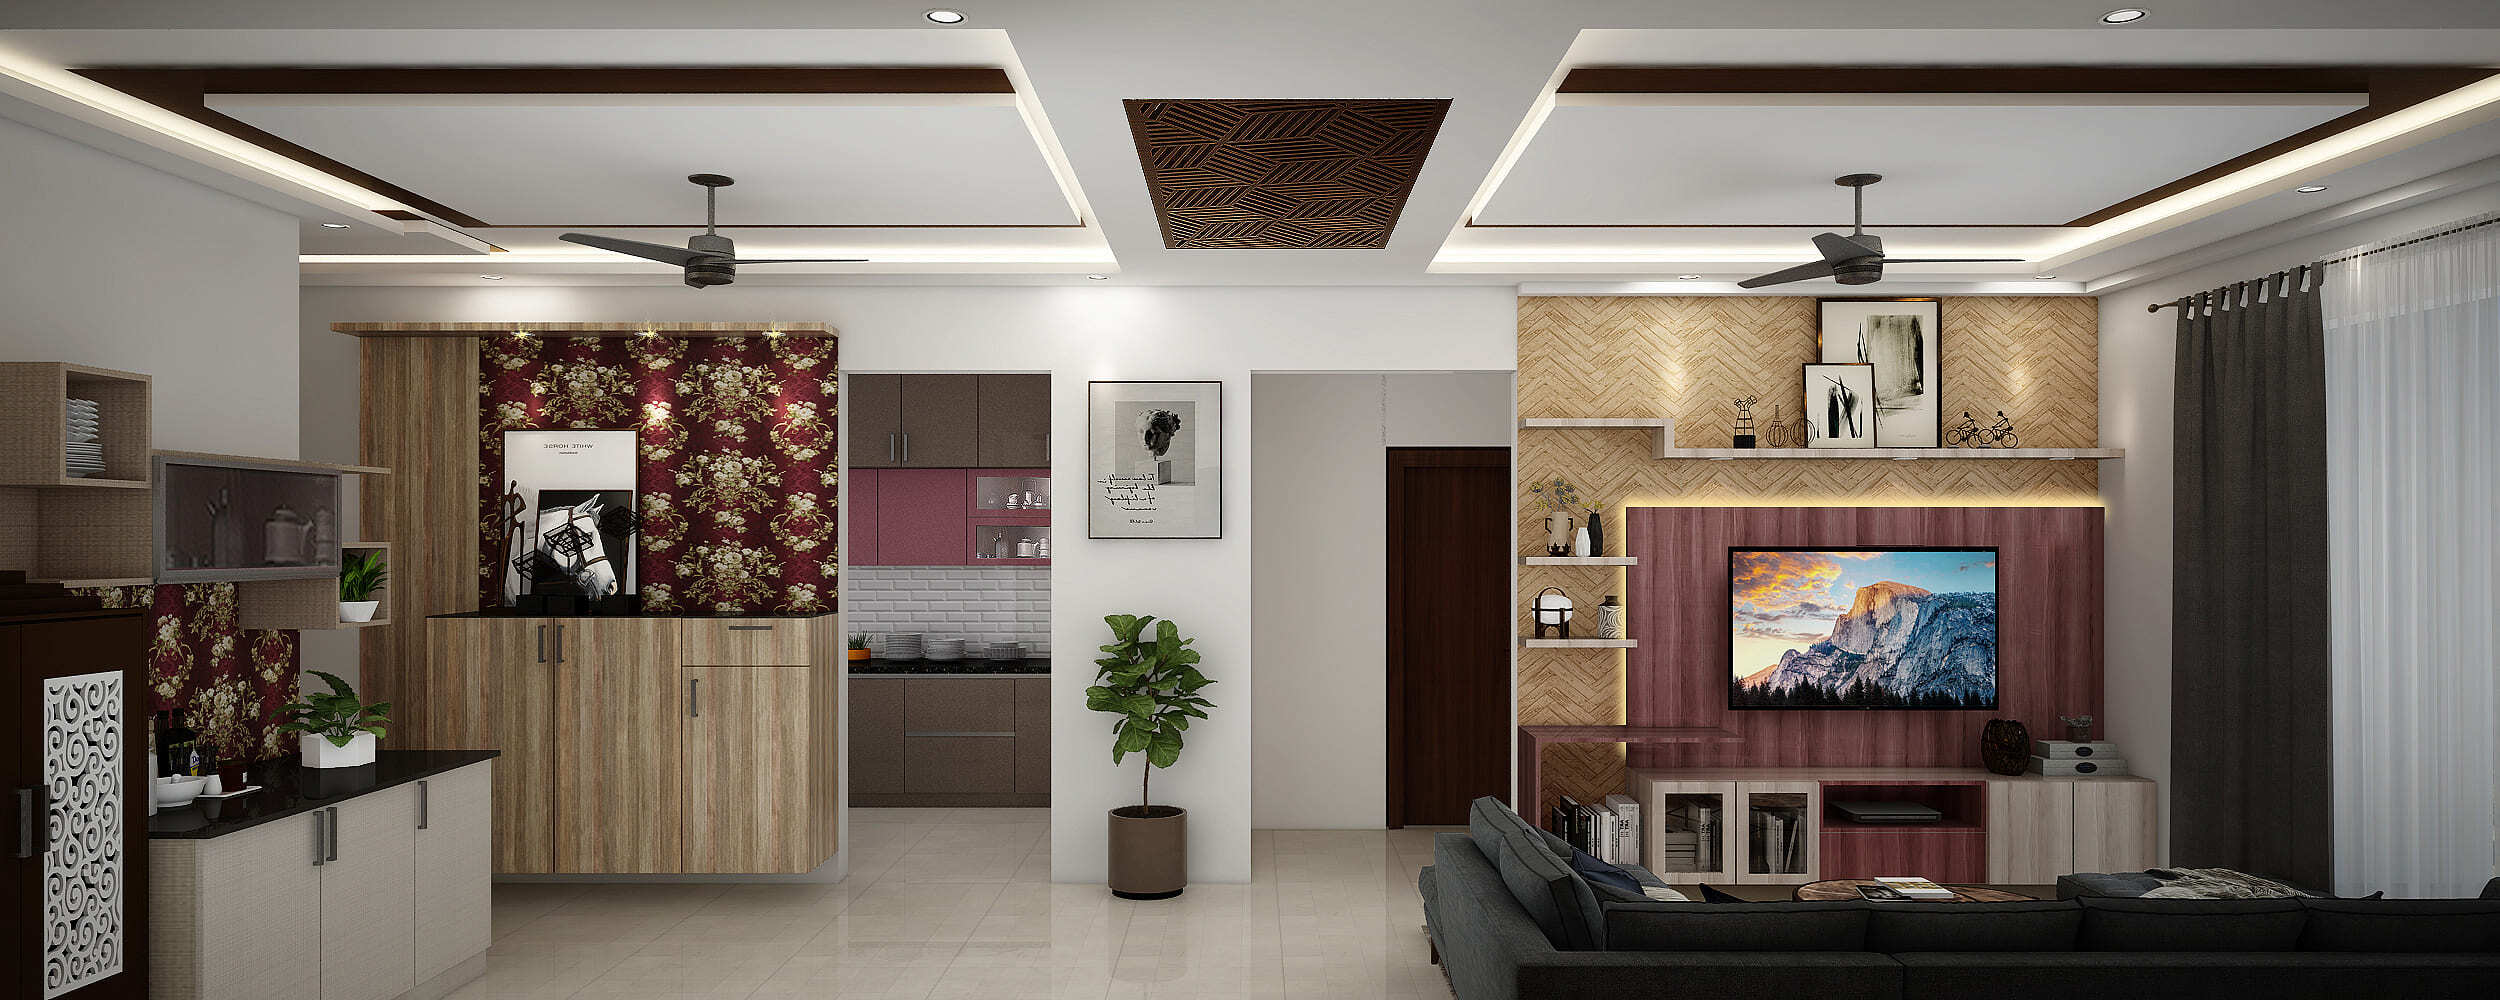 Best home interior designers in Bangalore - An Ultimate Guide about Living Room Interior Design Styles